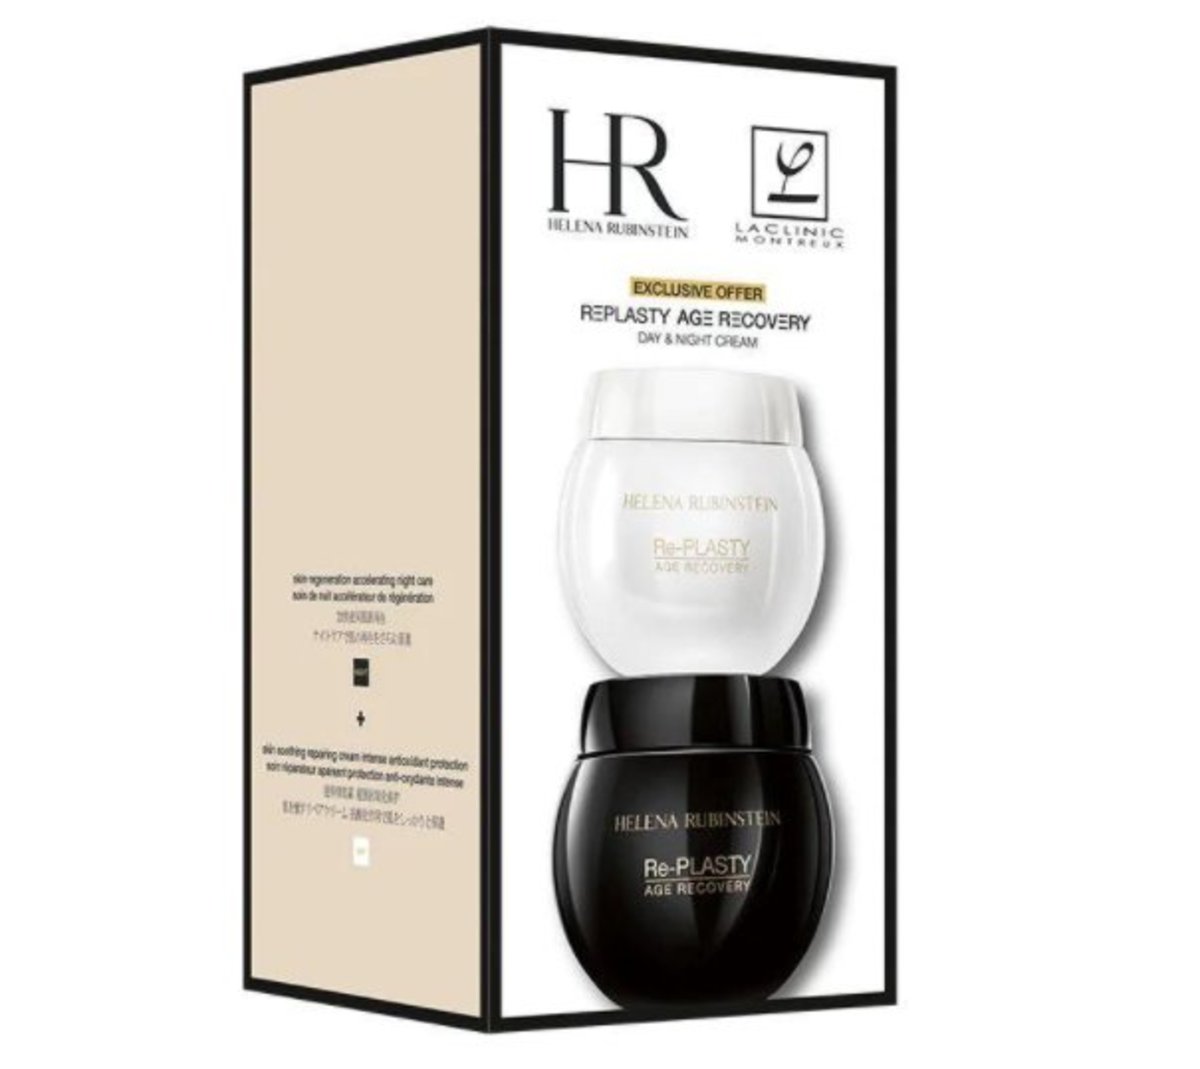 Re-Plasty Age Recovery Day & Night Cream Set 50ml + 50ml  (Parallel Import)